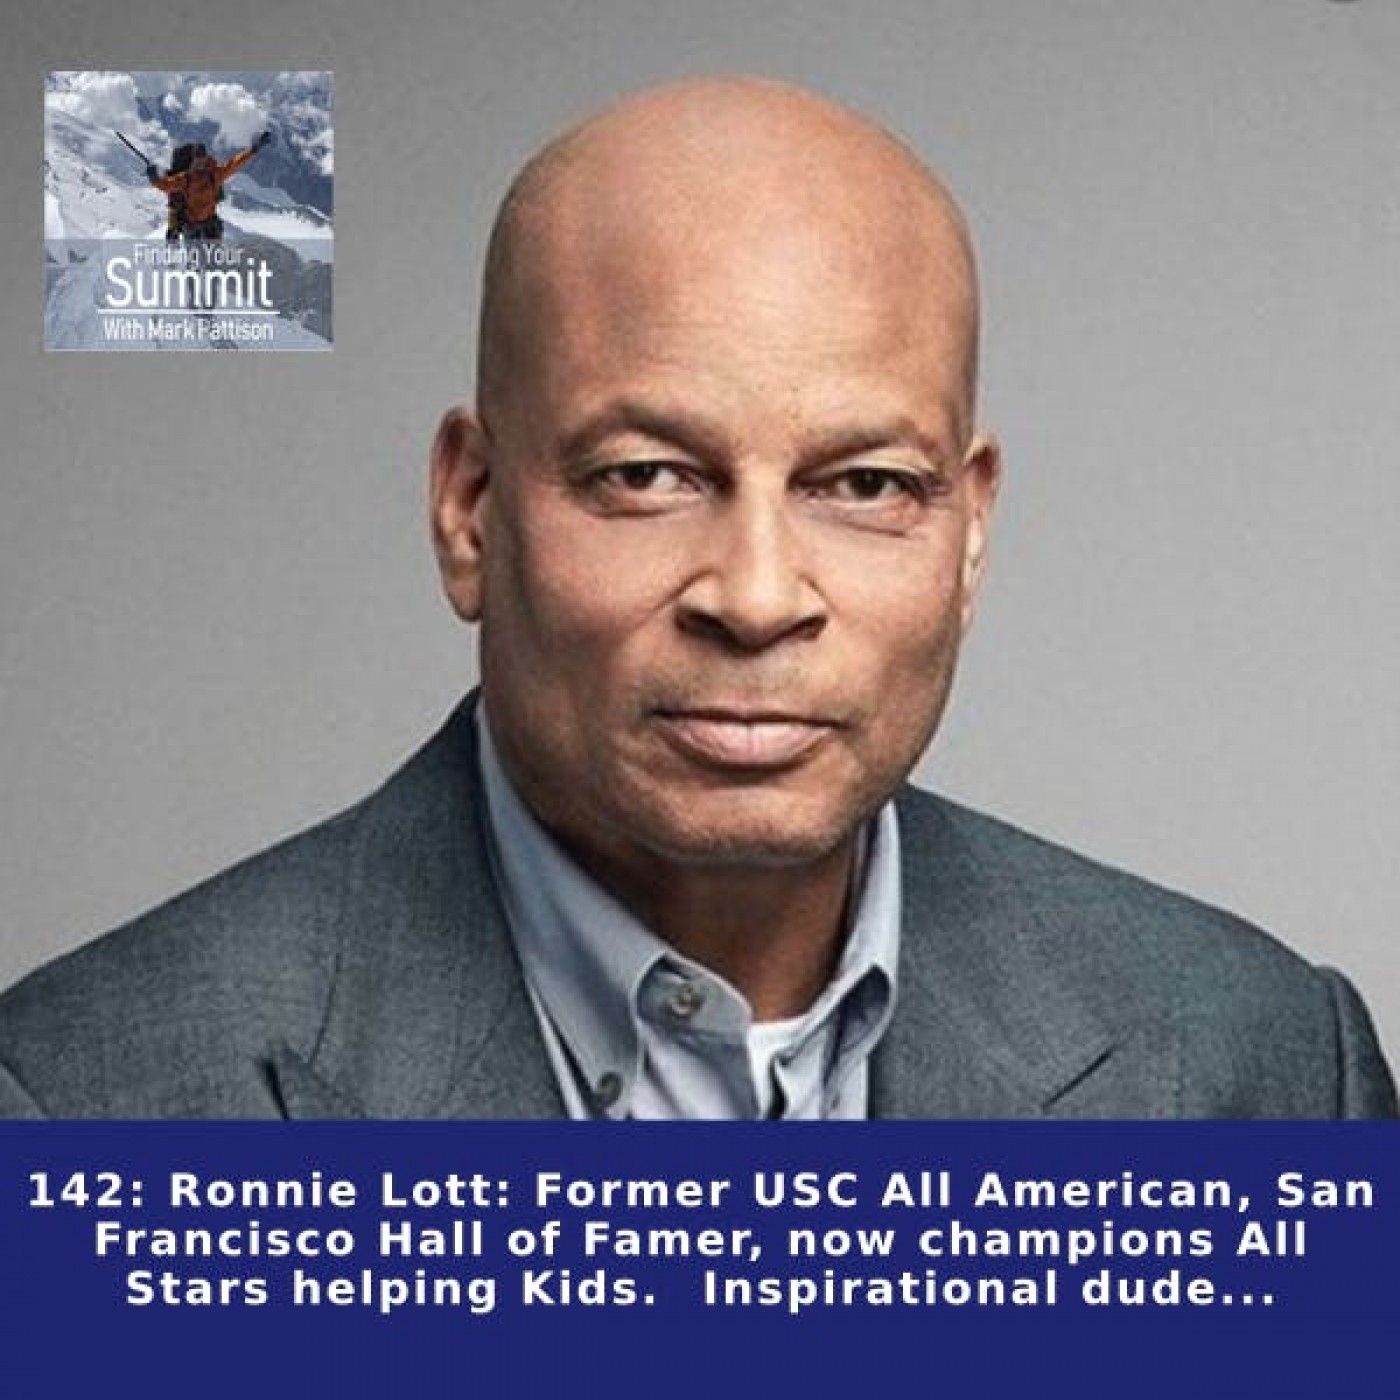 Ronnie Lott: Former USC All American, San Francisco Hall of Famer, now champions All Stars helping Kids.  Inspirational dude...